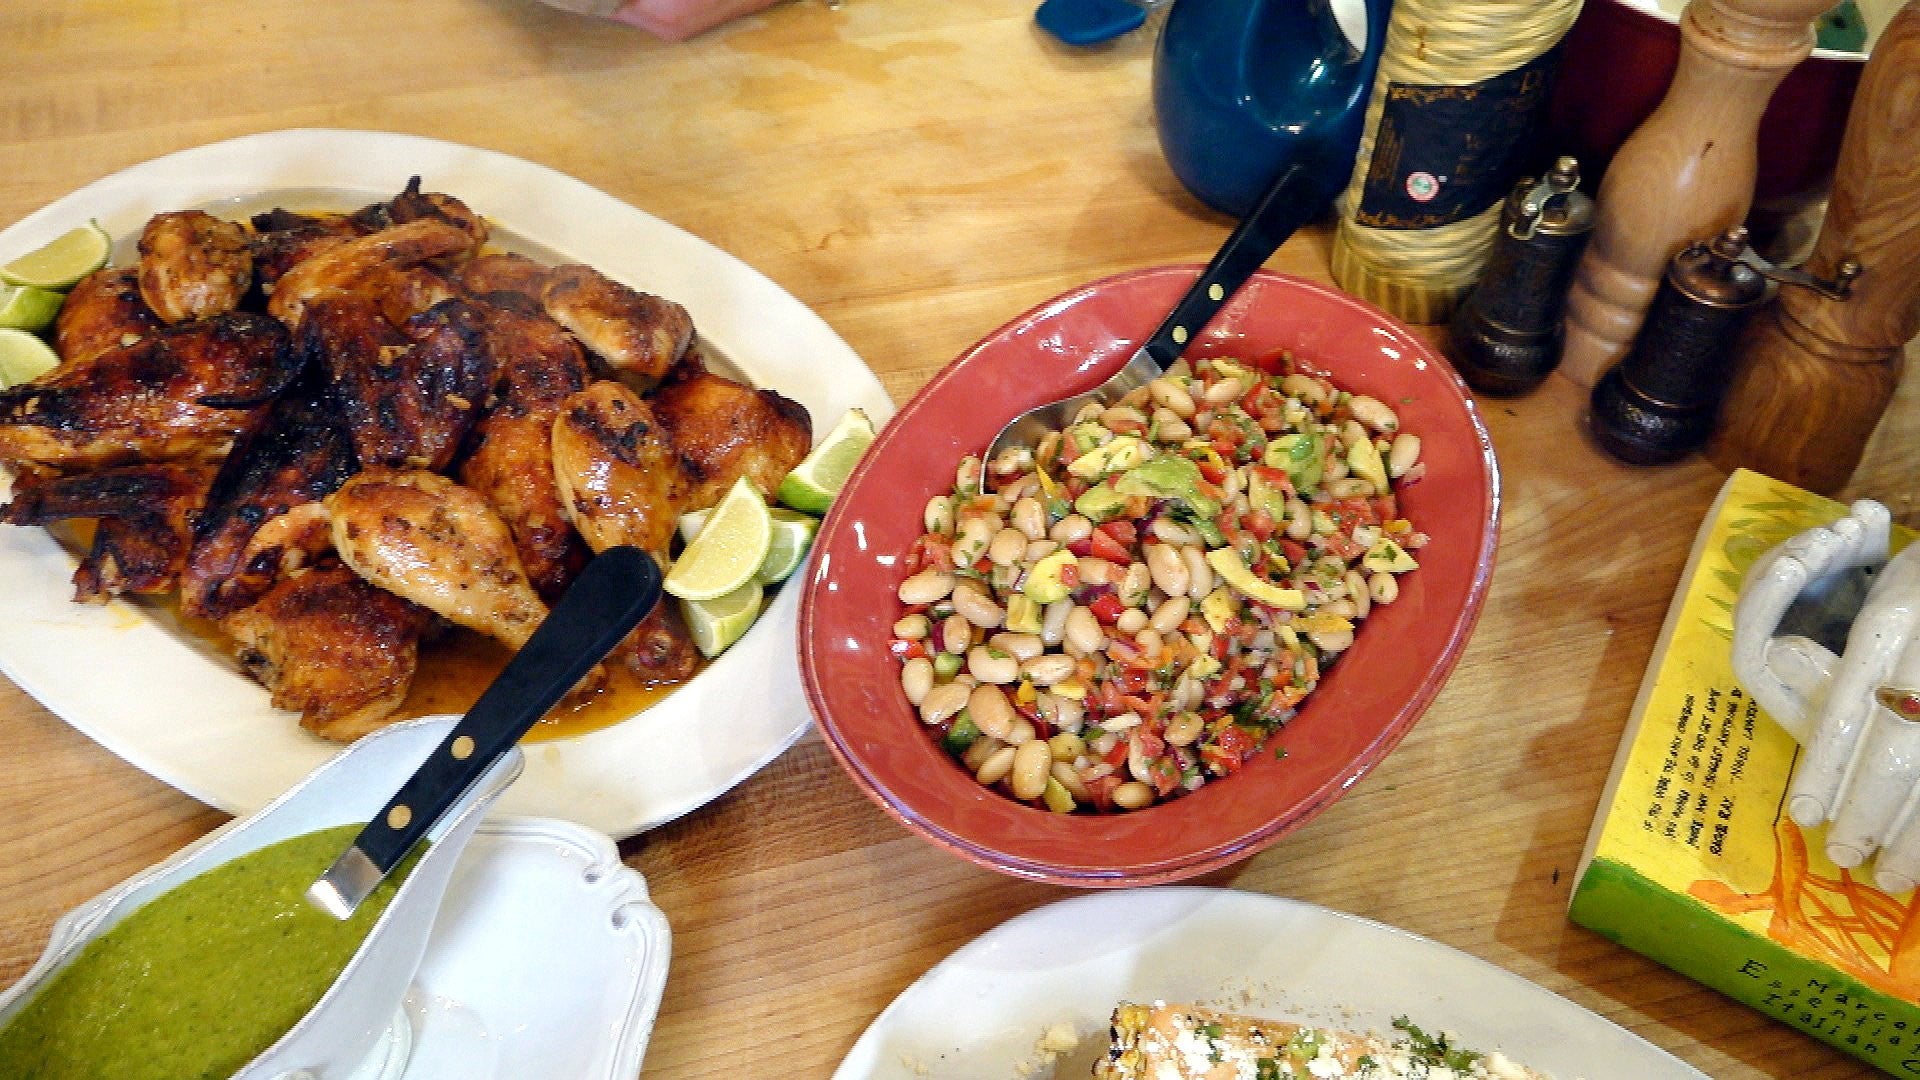 Peruvian-Style Chicken with Pepper-Herb Sauce and Peruvian-Style Bean Salad